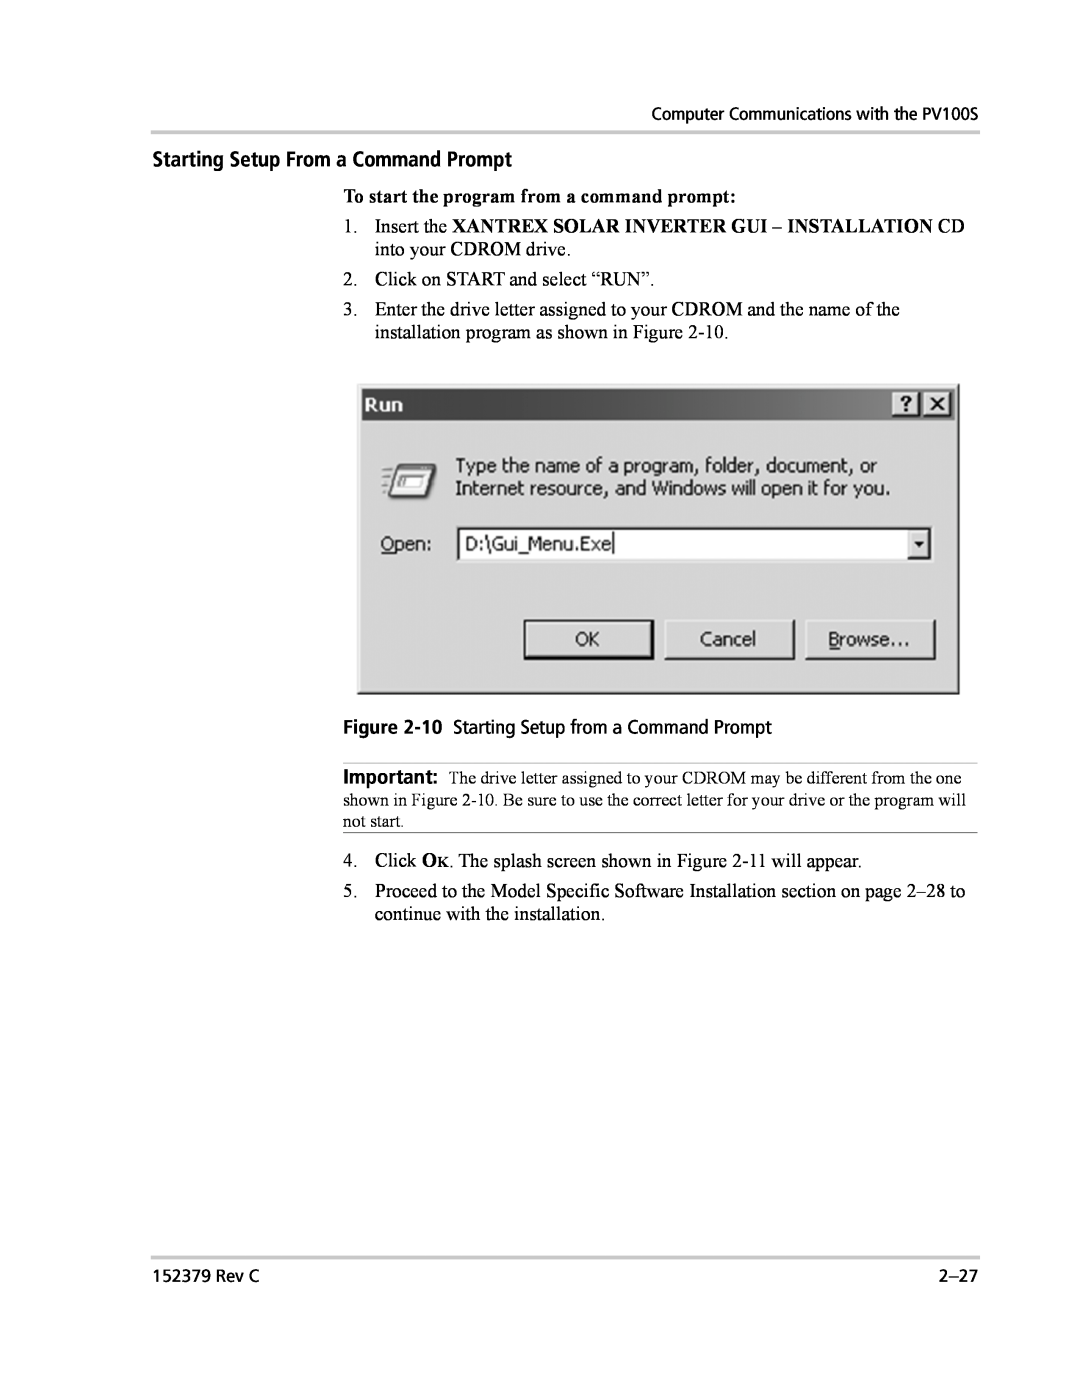 Xantrex Technology PV100S-208 manual Starting Setup From a Command Prompt 